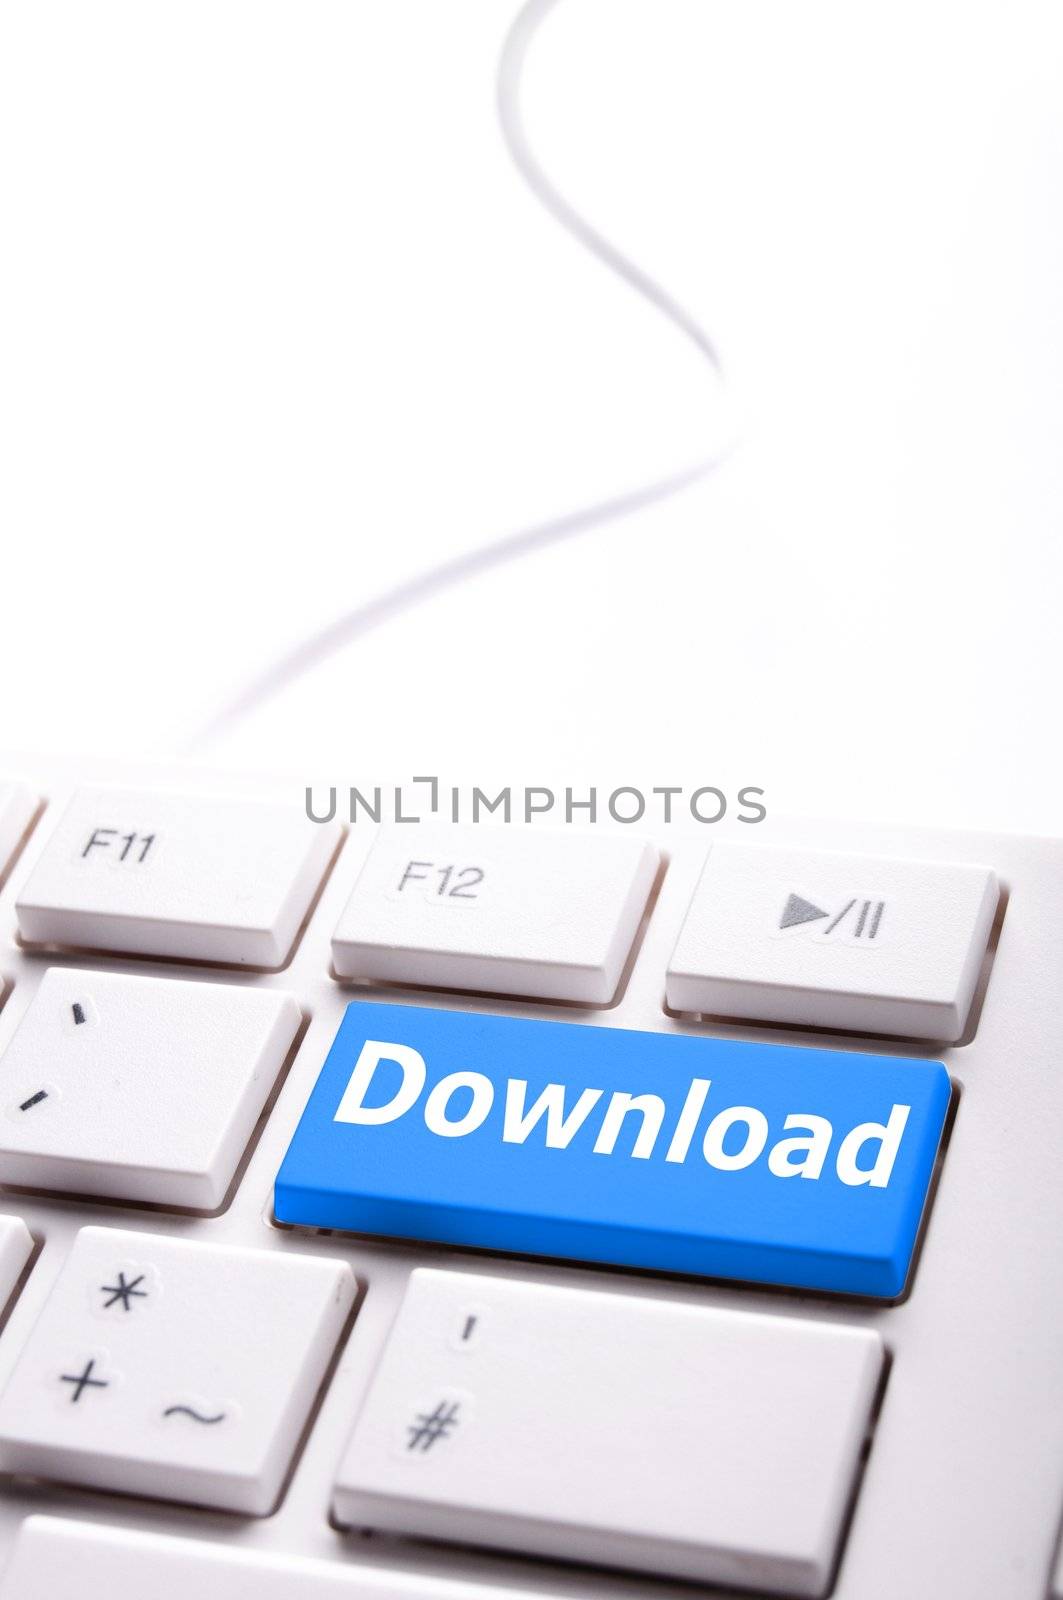 download key or button showing internet file or data sharing